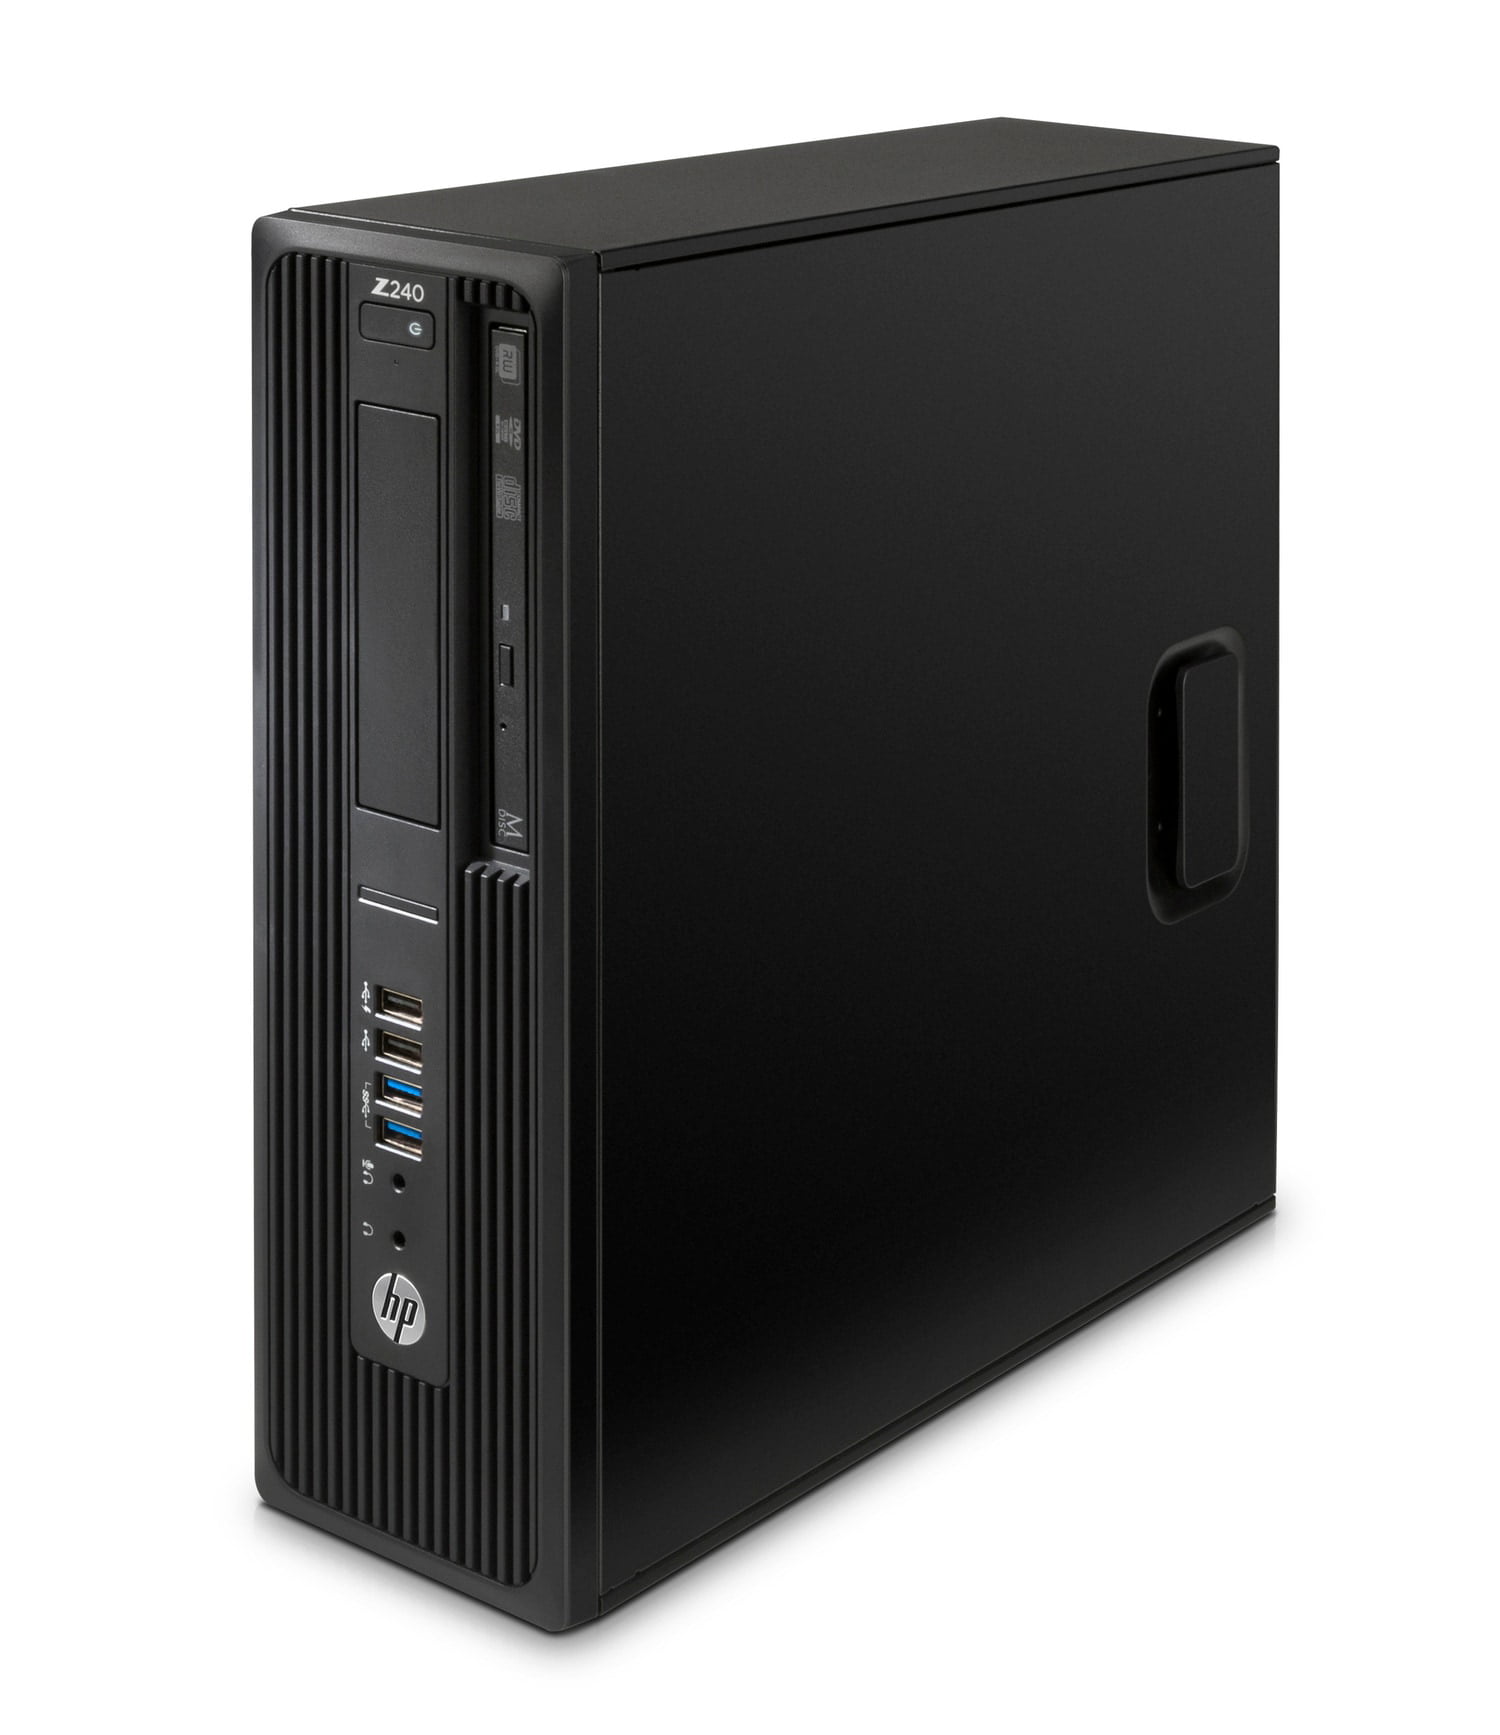 HP Z240 Small Form Factor Workstation, Intel Xeon E3-1240V5 3.5GHz